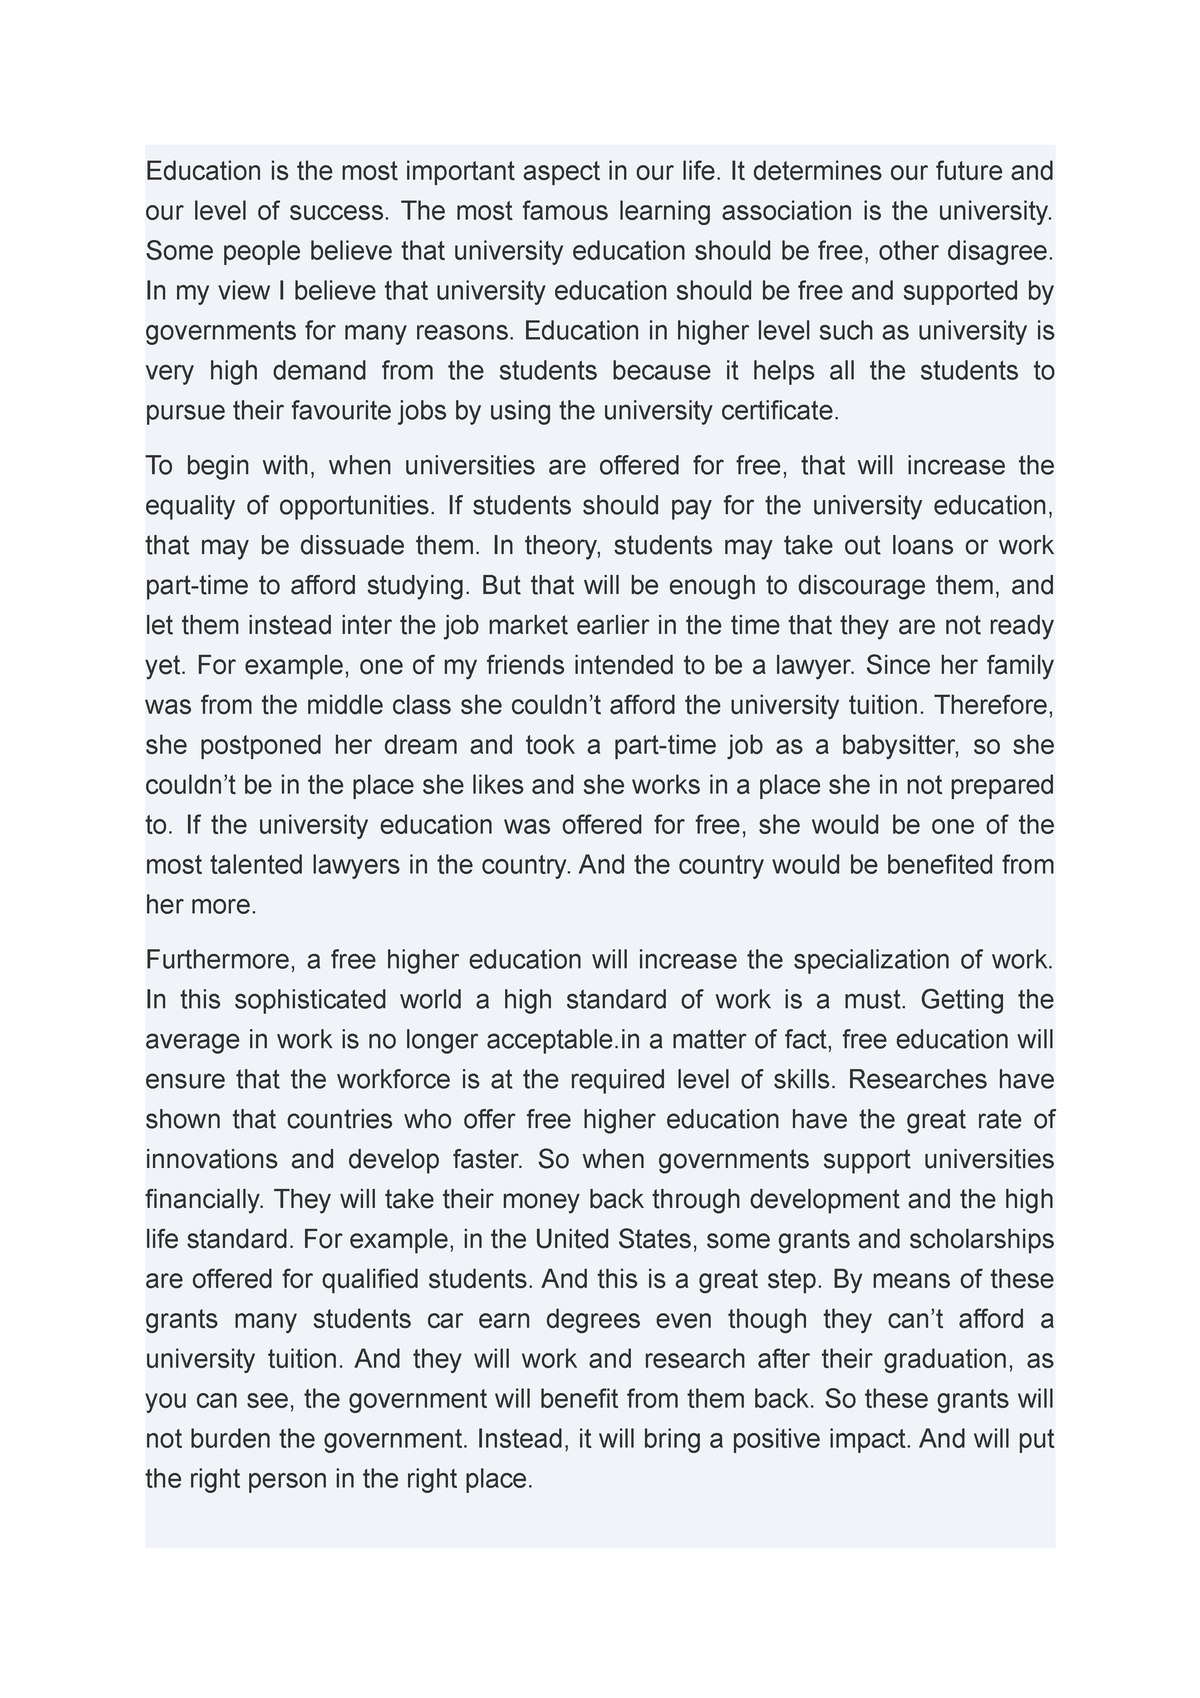 muet essay about education